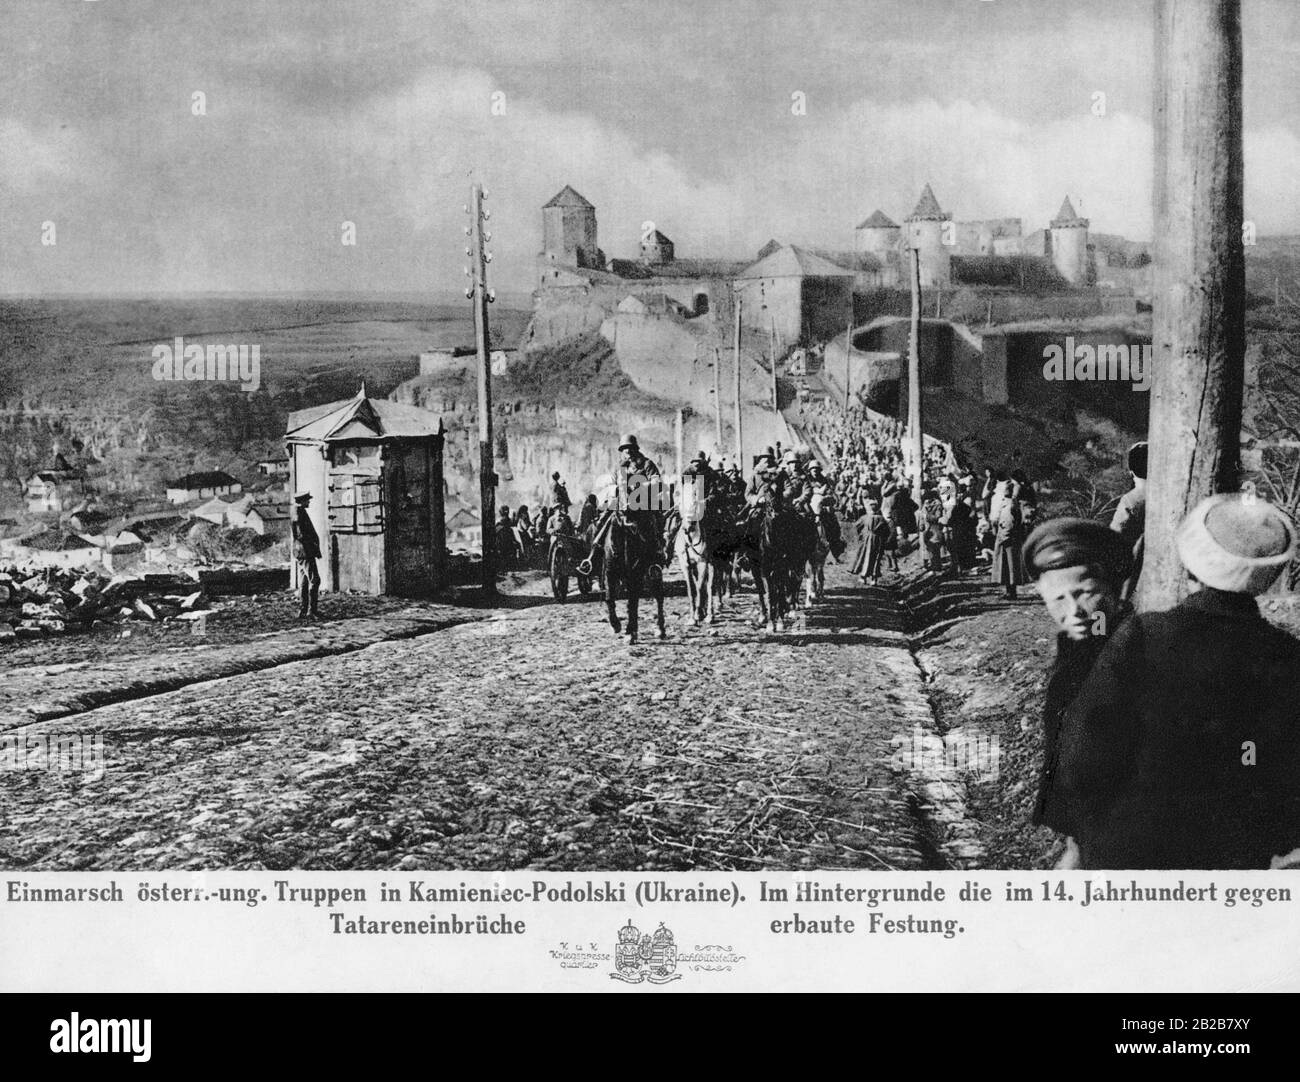 After Leon Trotsky refused to sign the German peace treaty for the end of World War I, German and Austrian troops march into the Ukrainian city of Kamieniec-Podolski to force Ukraine to agree to the peace treaty. In the background is the fortress built in the 14th century to protect the region from the Tatars. Stock Photo